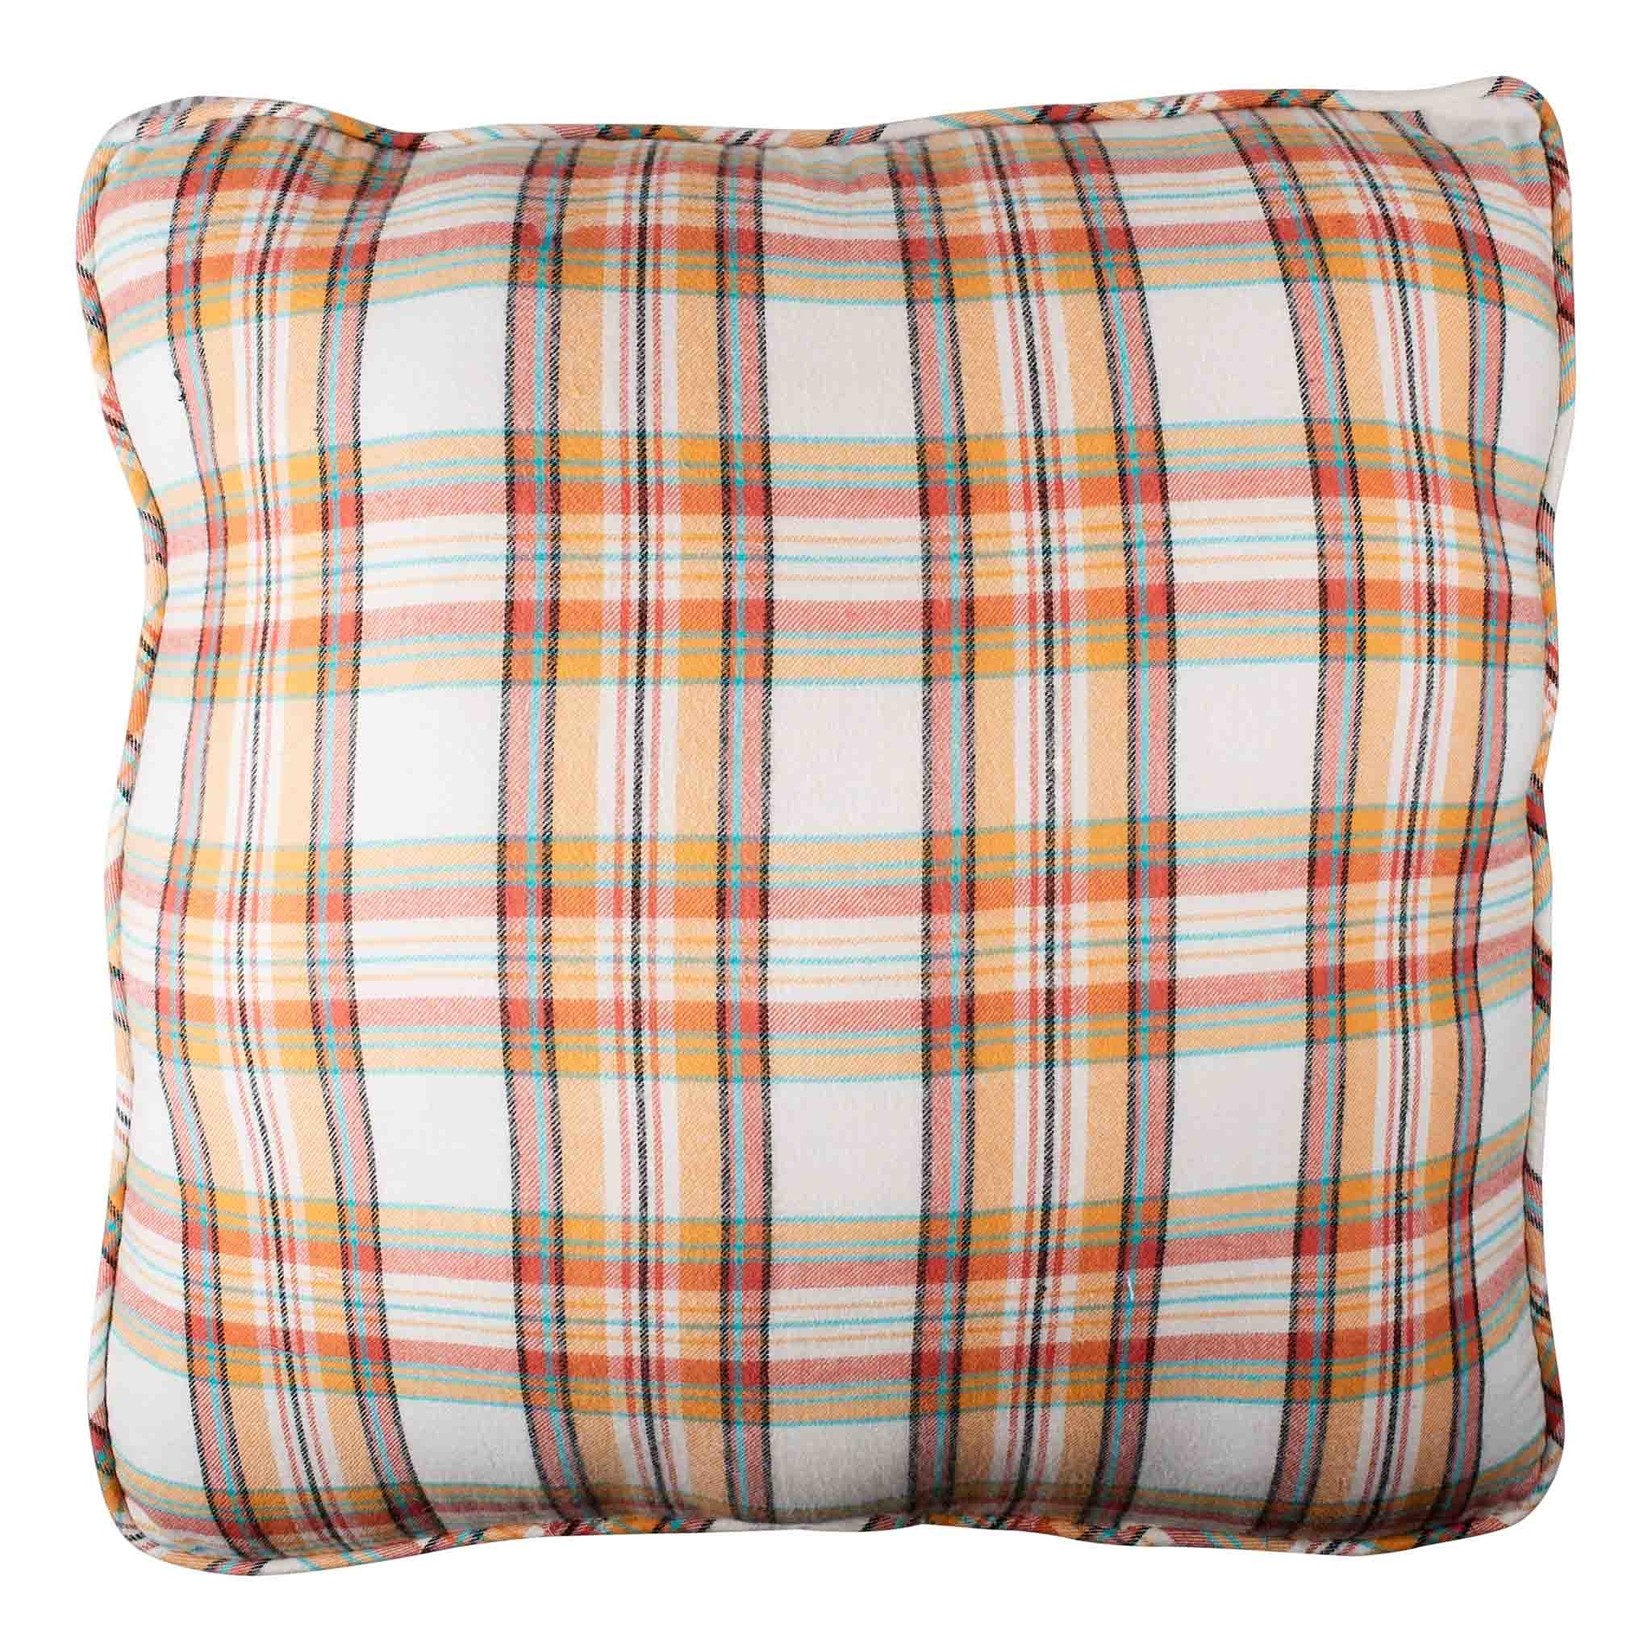 Glory Haus FALL IS OUR FAVORITE PILLOW